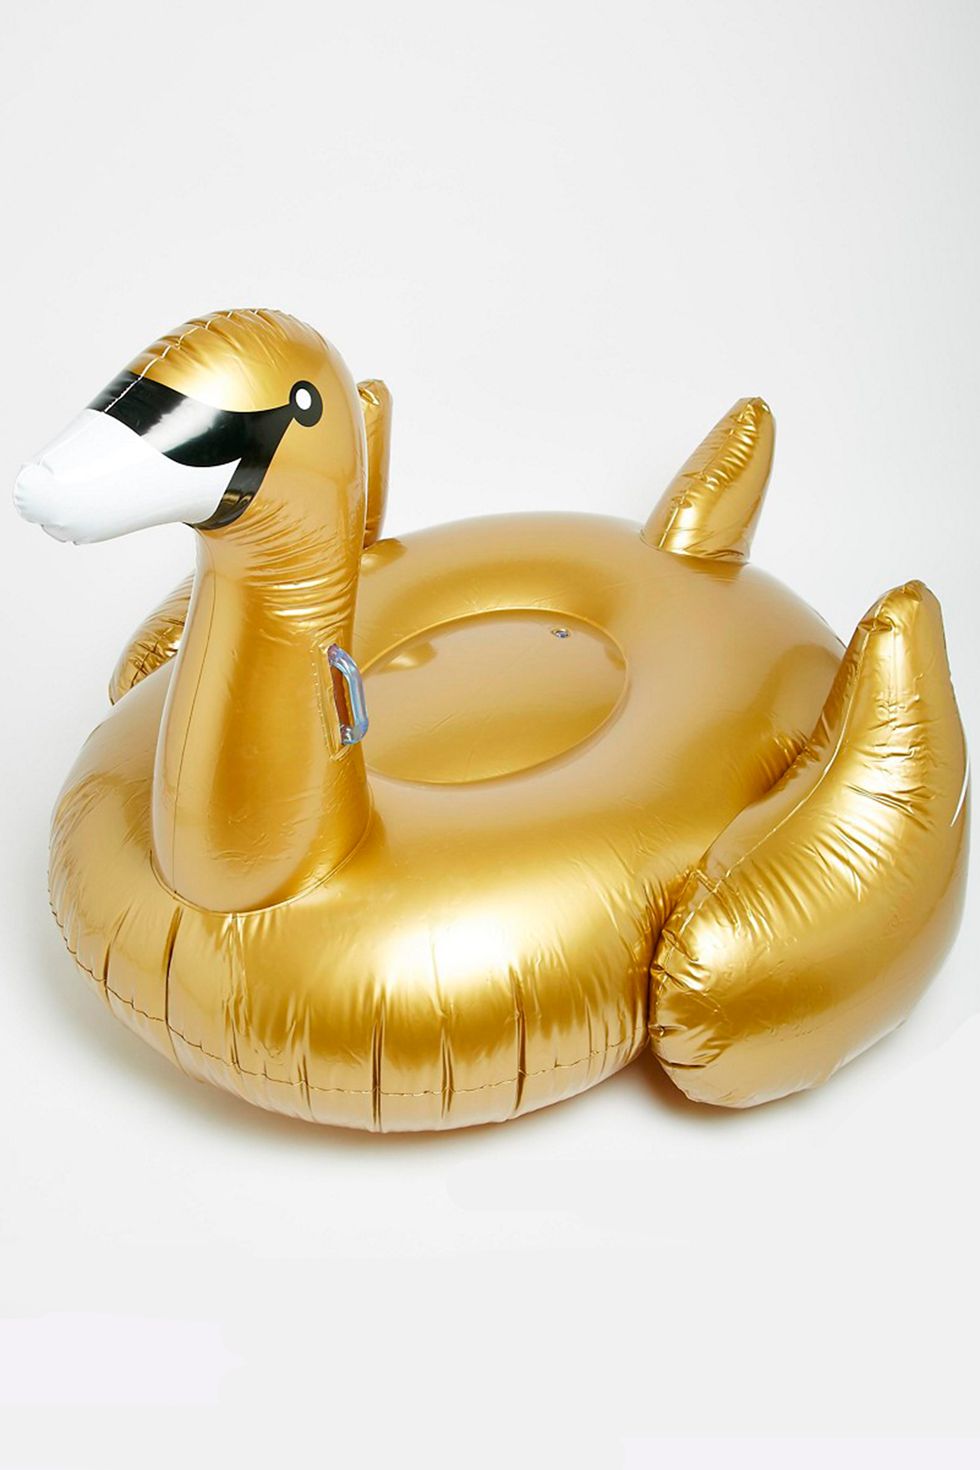 pool floats, pool inflatables